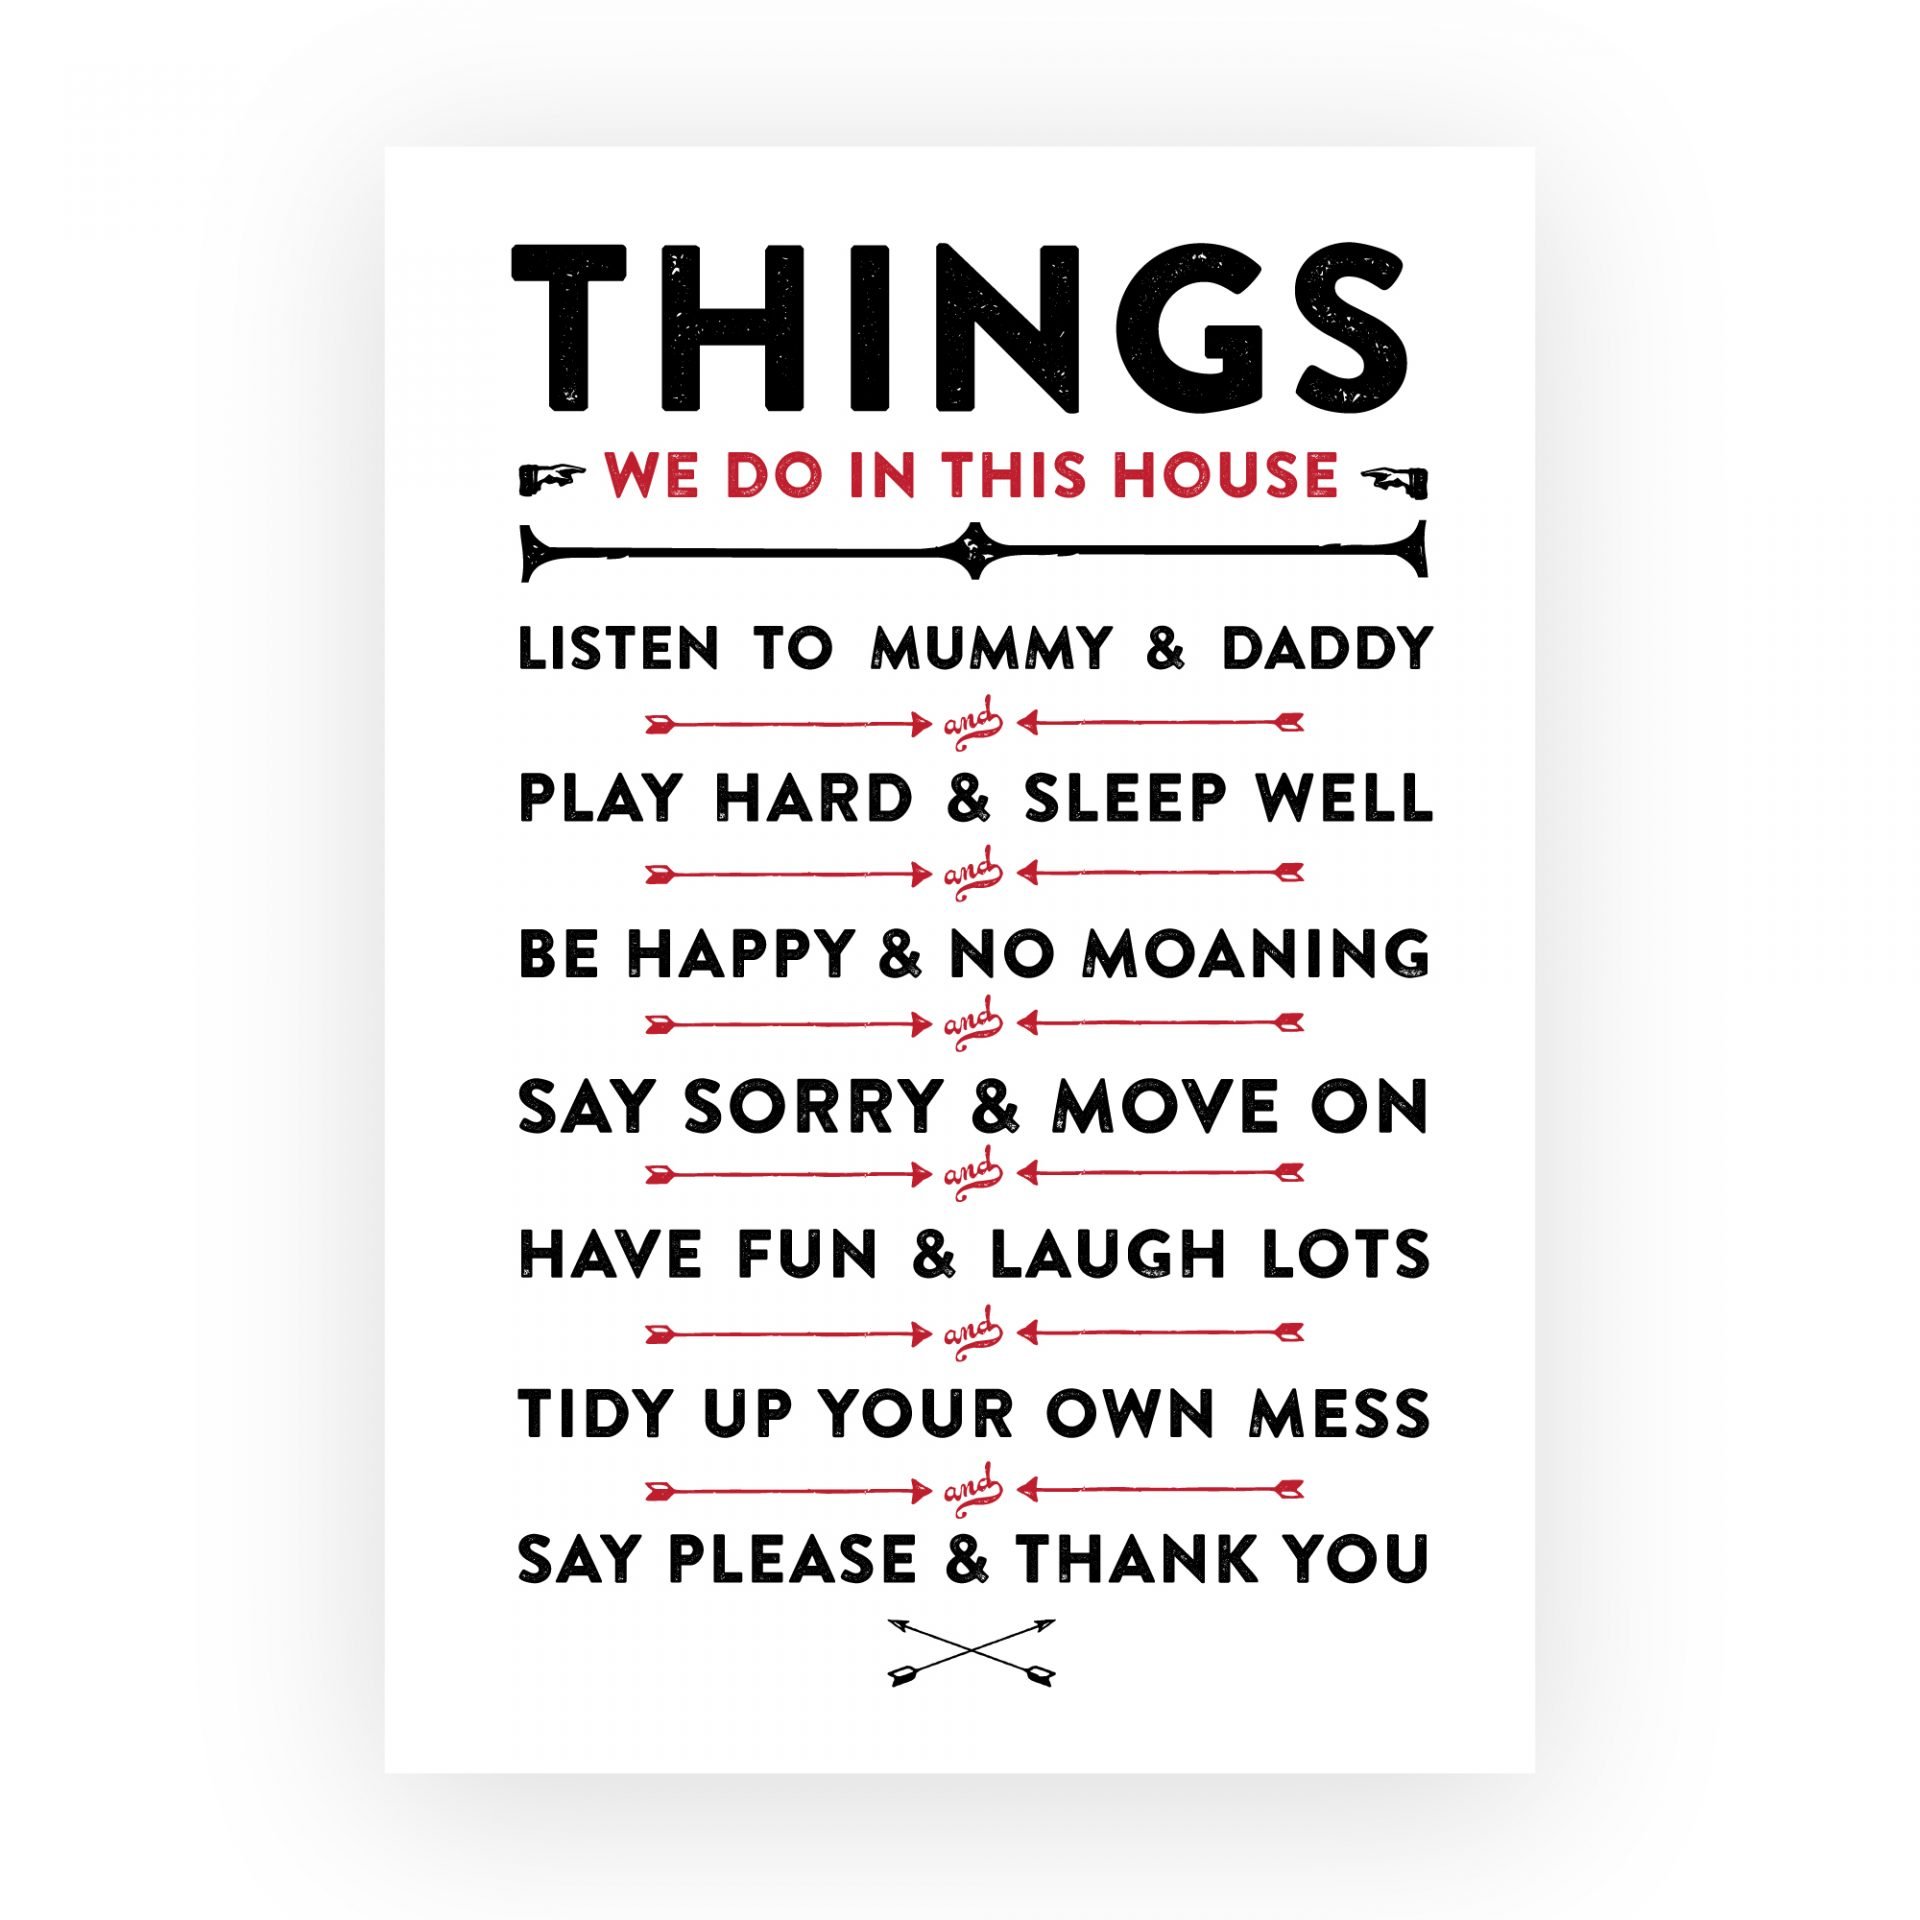 Personalised Family House Rules Print Personalise with your own rules.